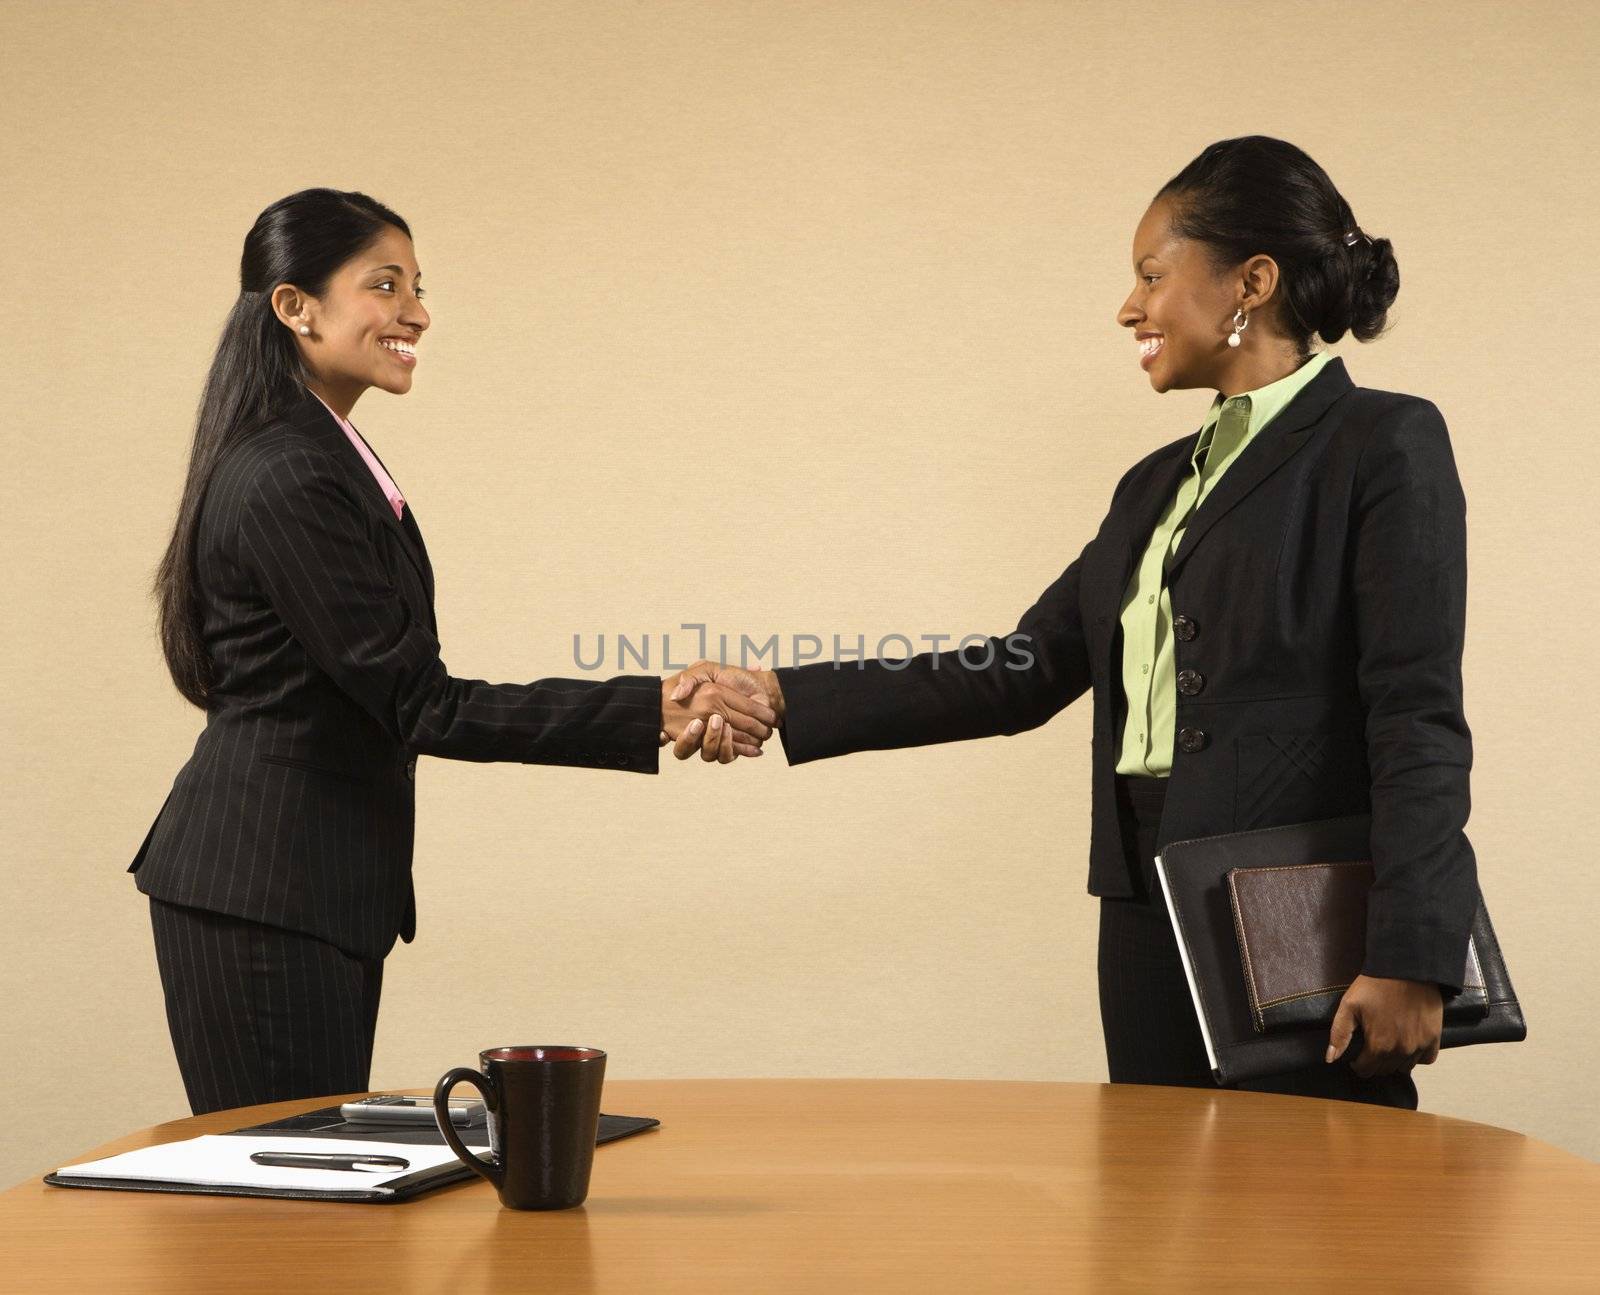 Two businesswomen in suits shaking hands and smiling.